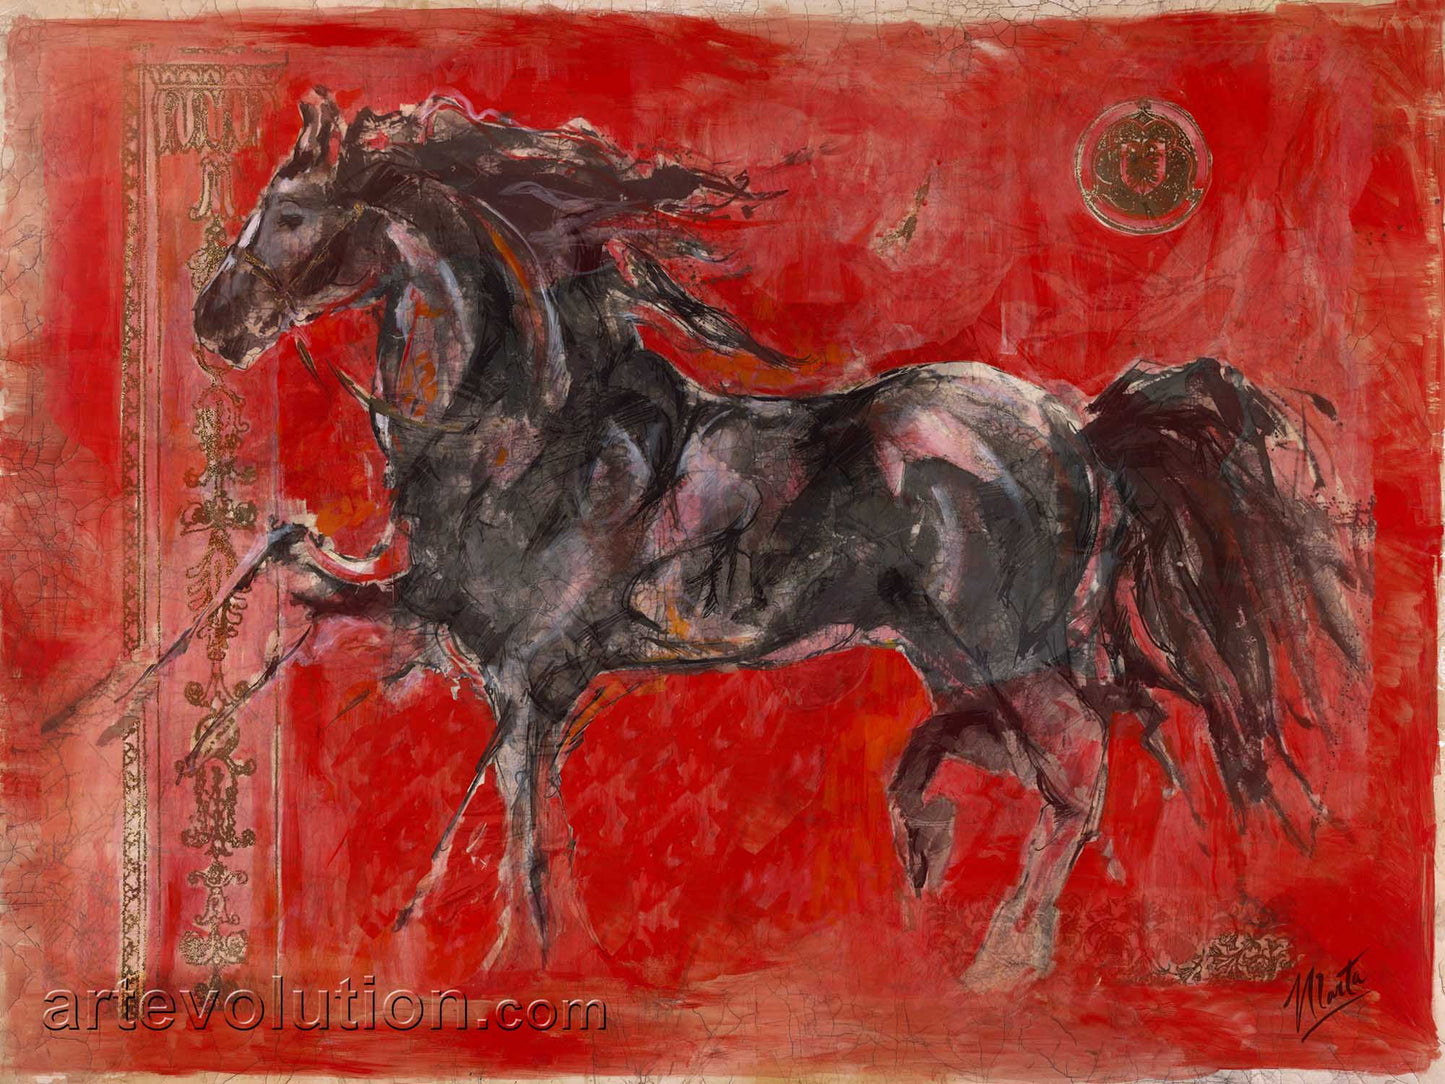 Horse on Red